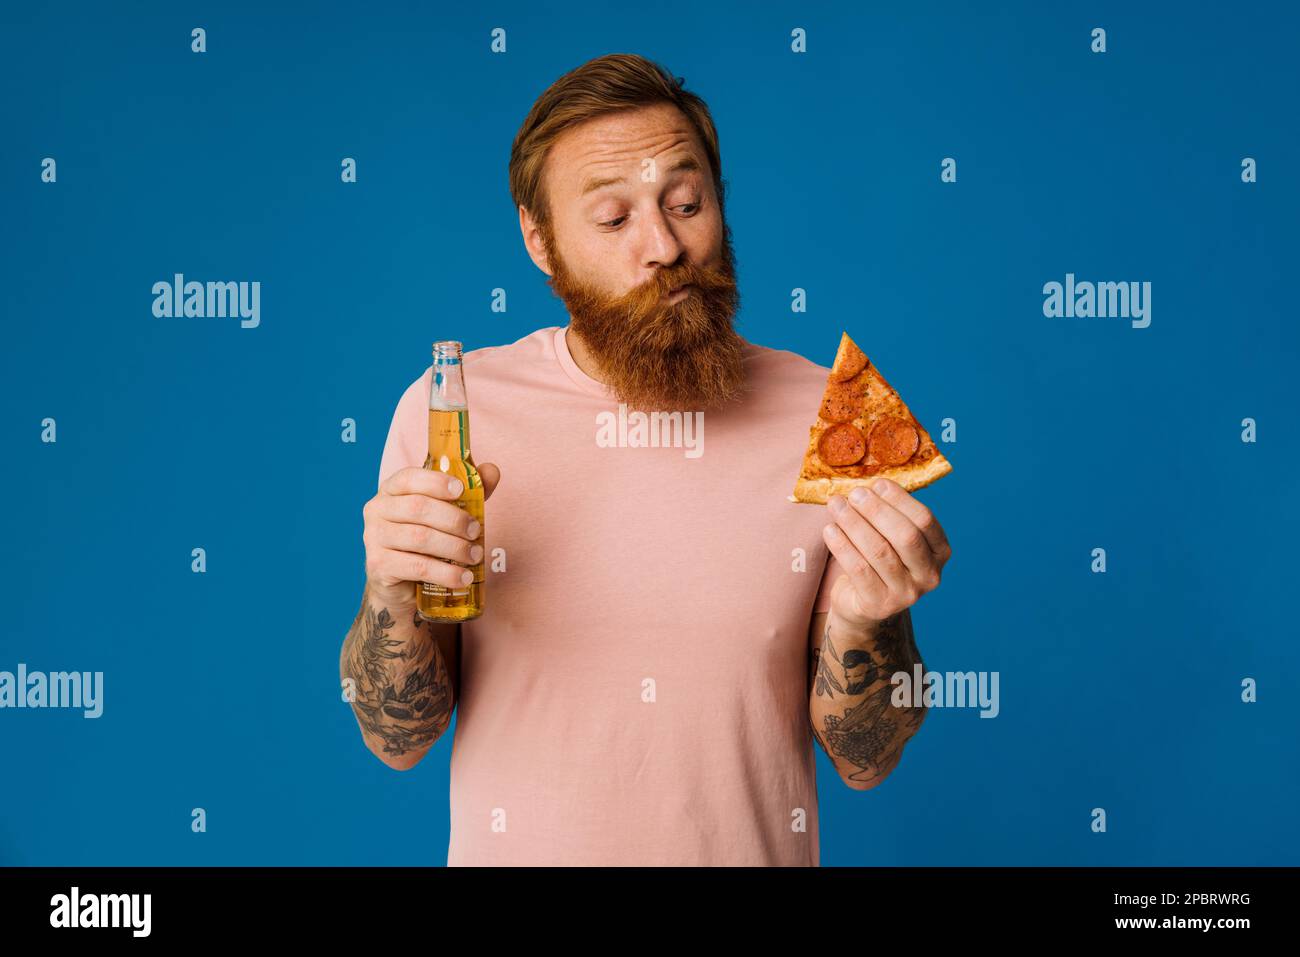 Portrait of confused white man choosing between pizza and beer apple isolated over blue background Stock Photo